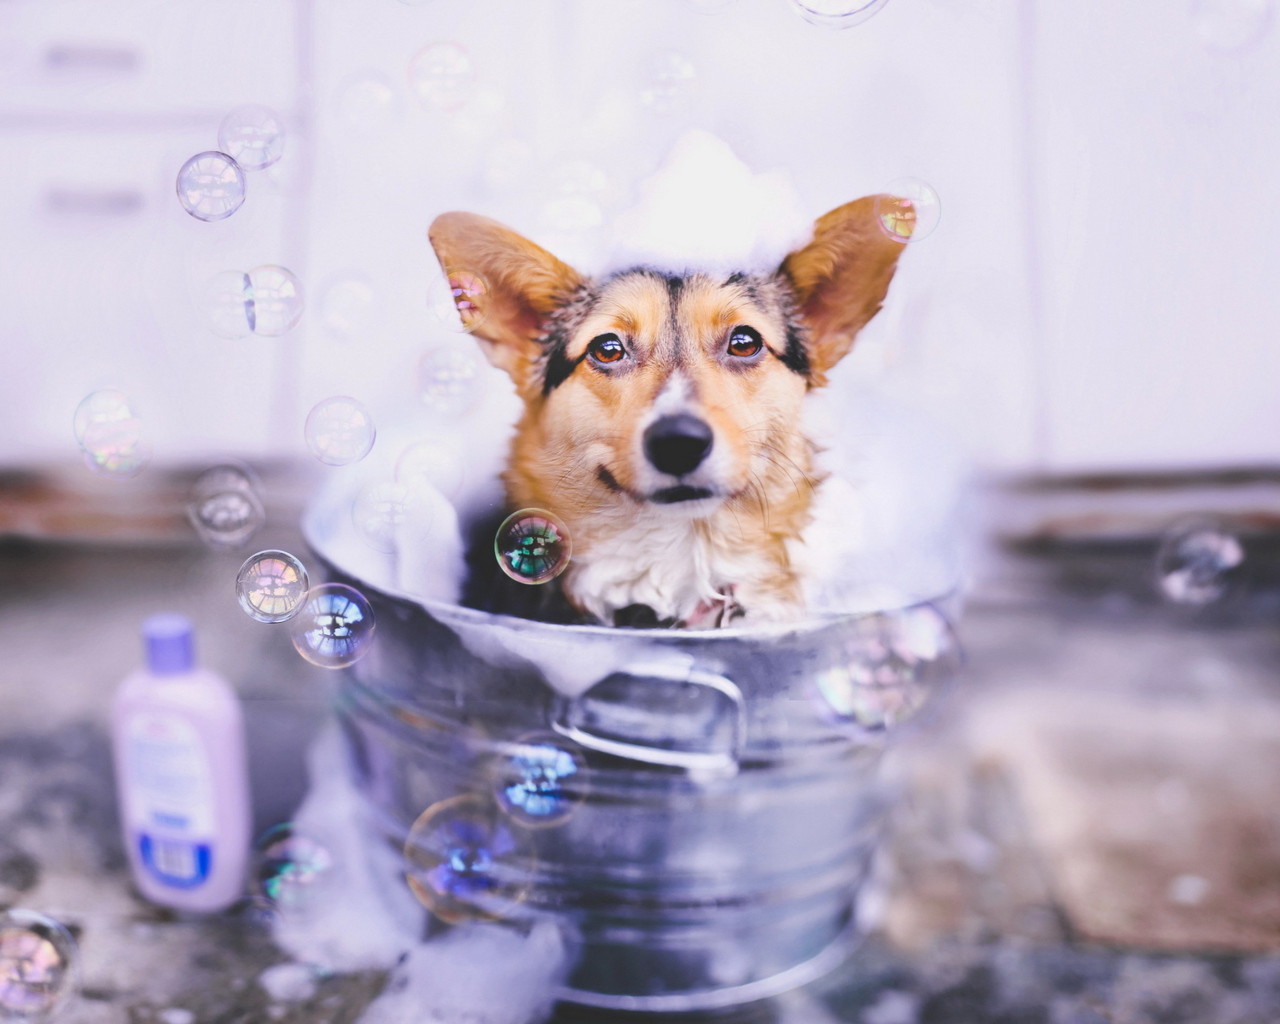 Dog And Bubbles wallpaper 1280x1024